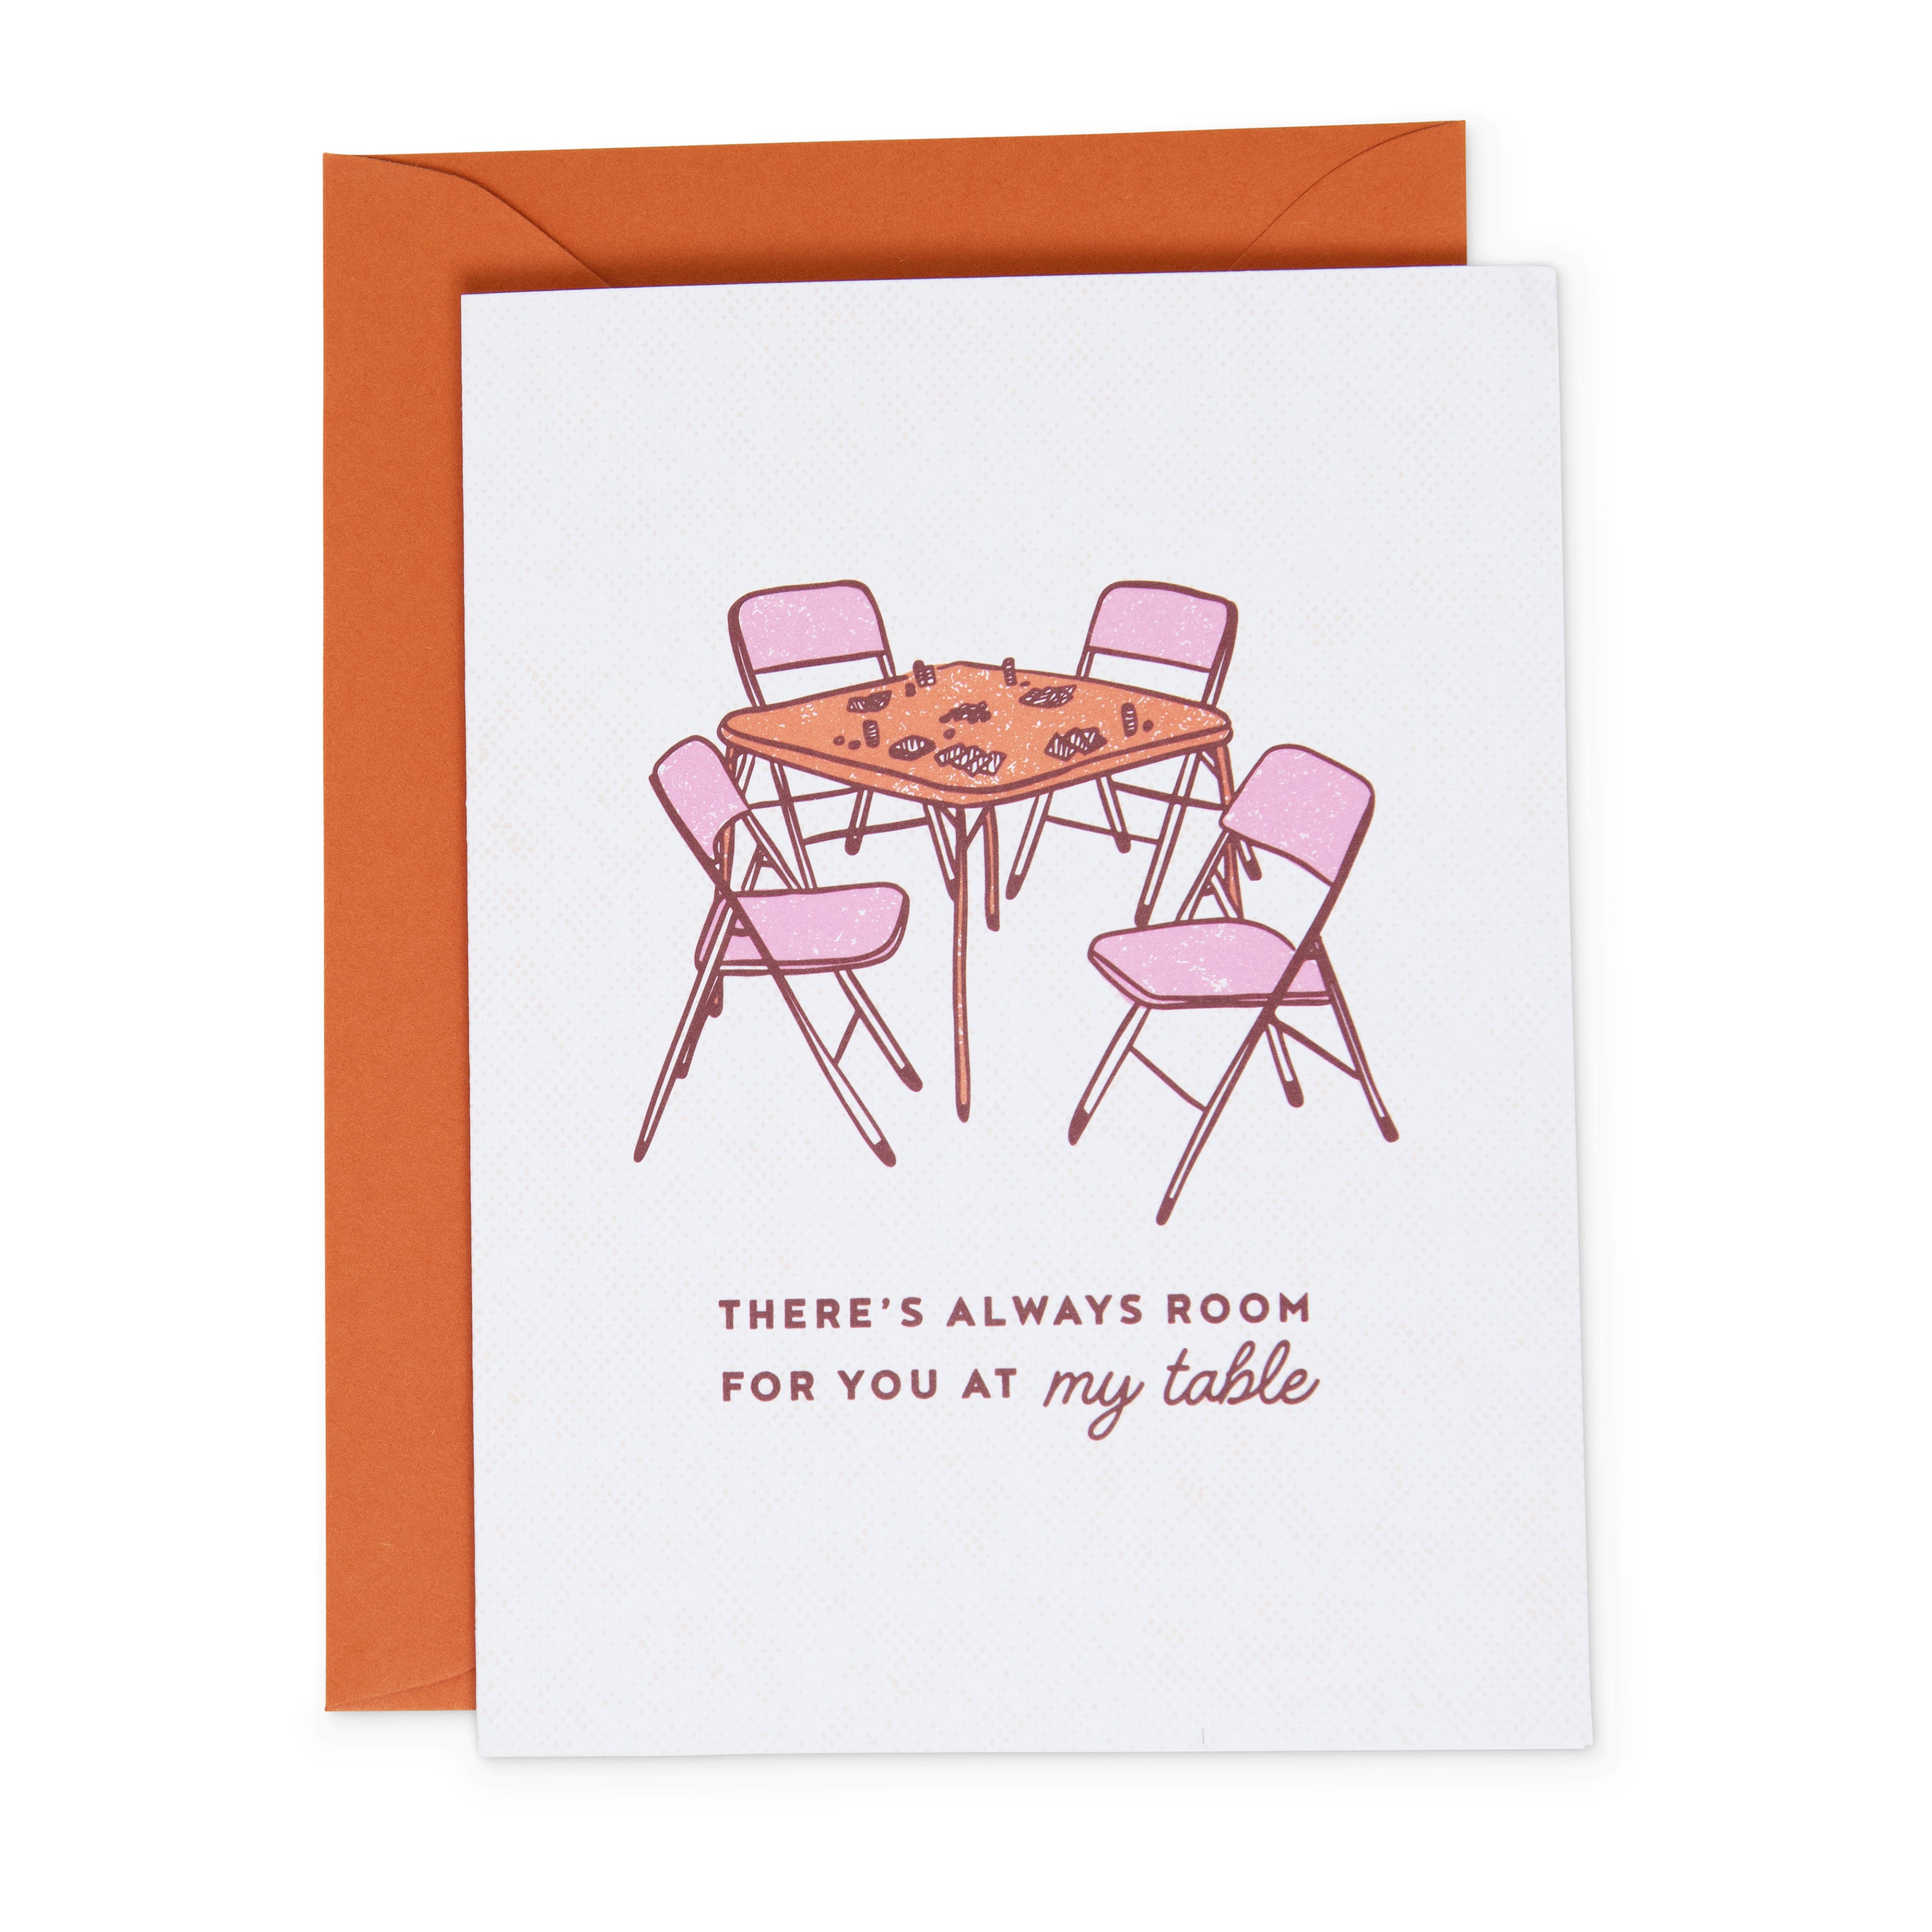 "There's always room for you at my table" Toast Card